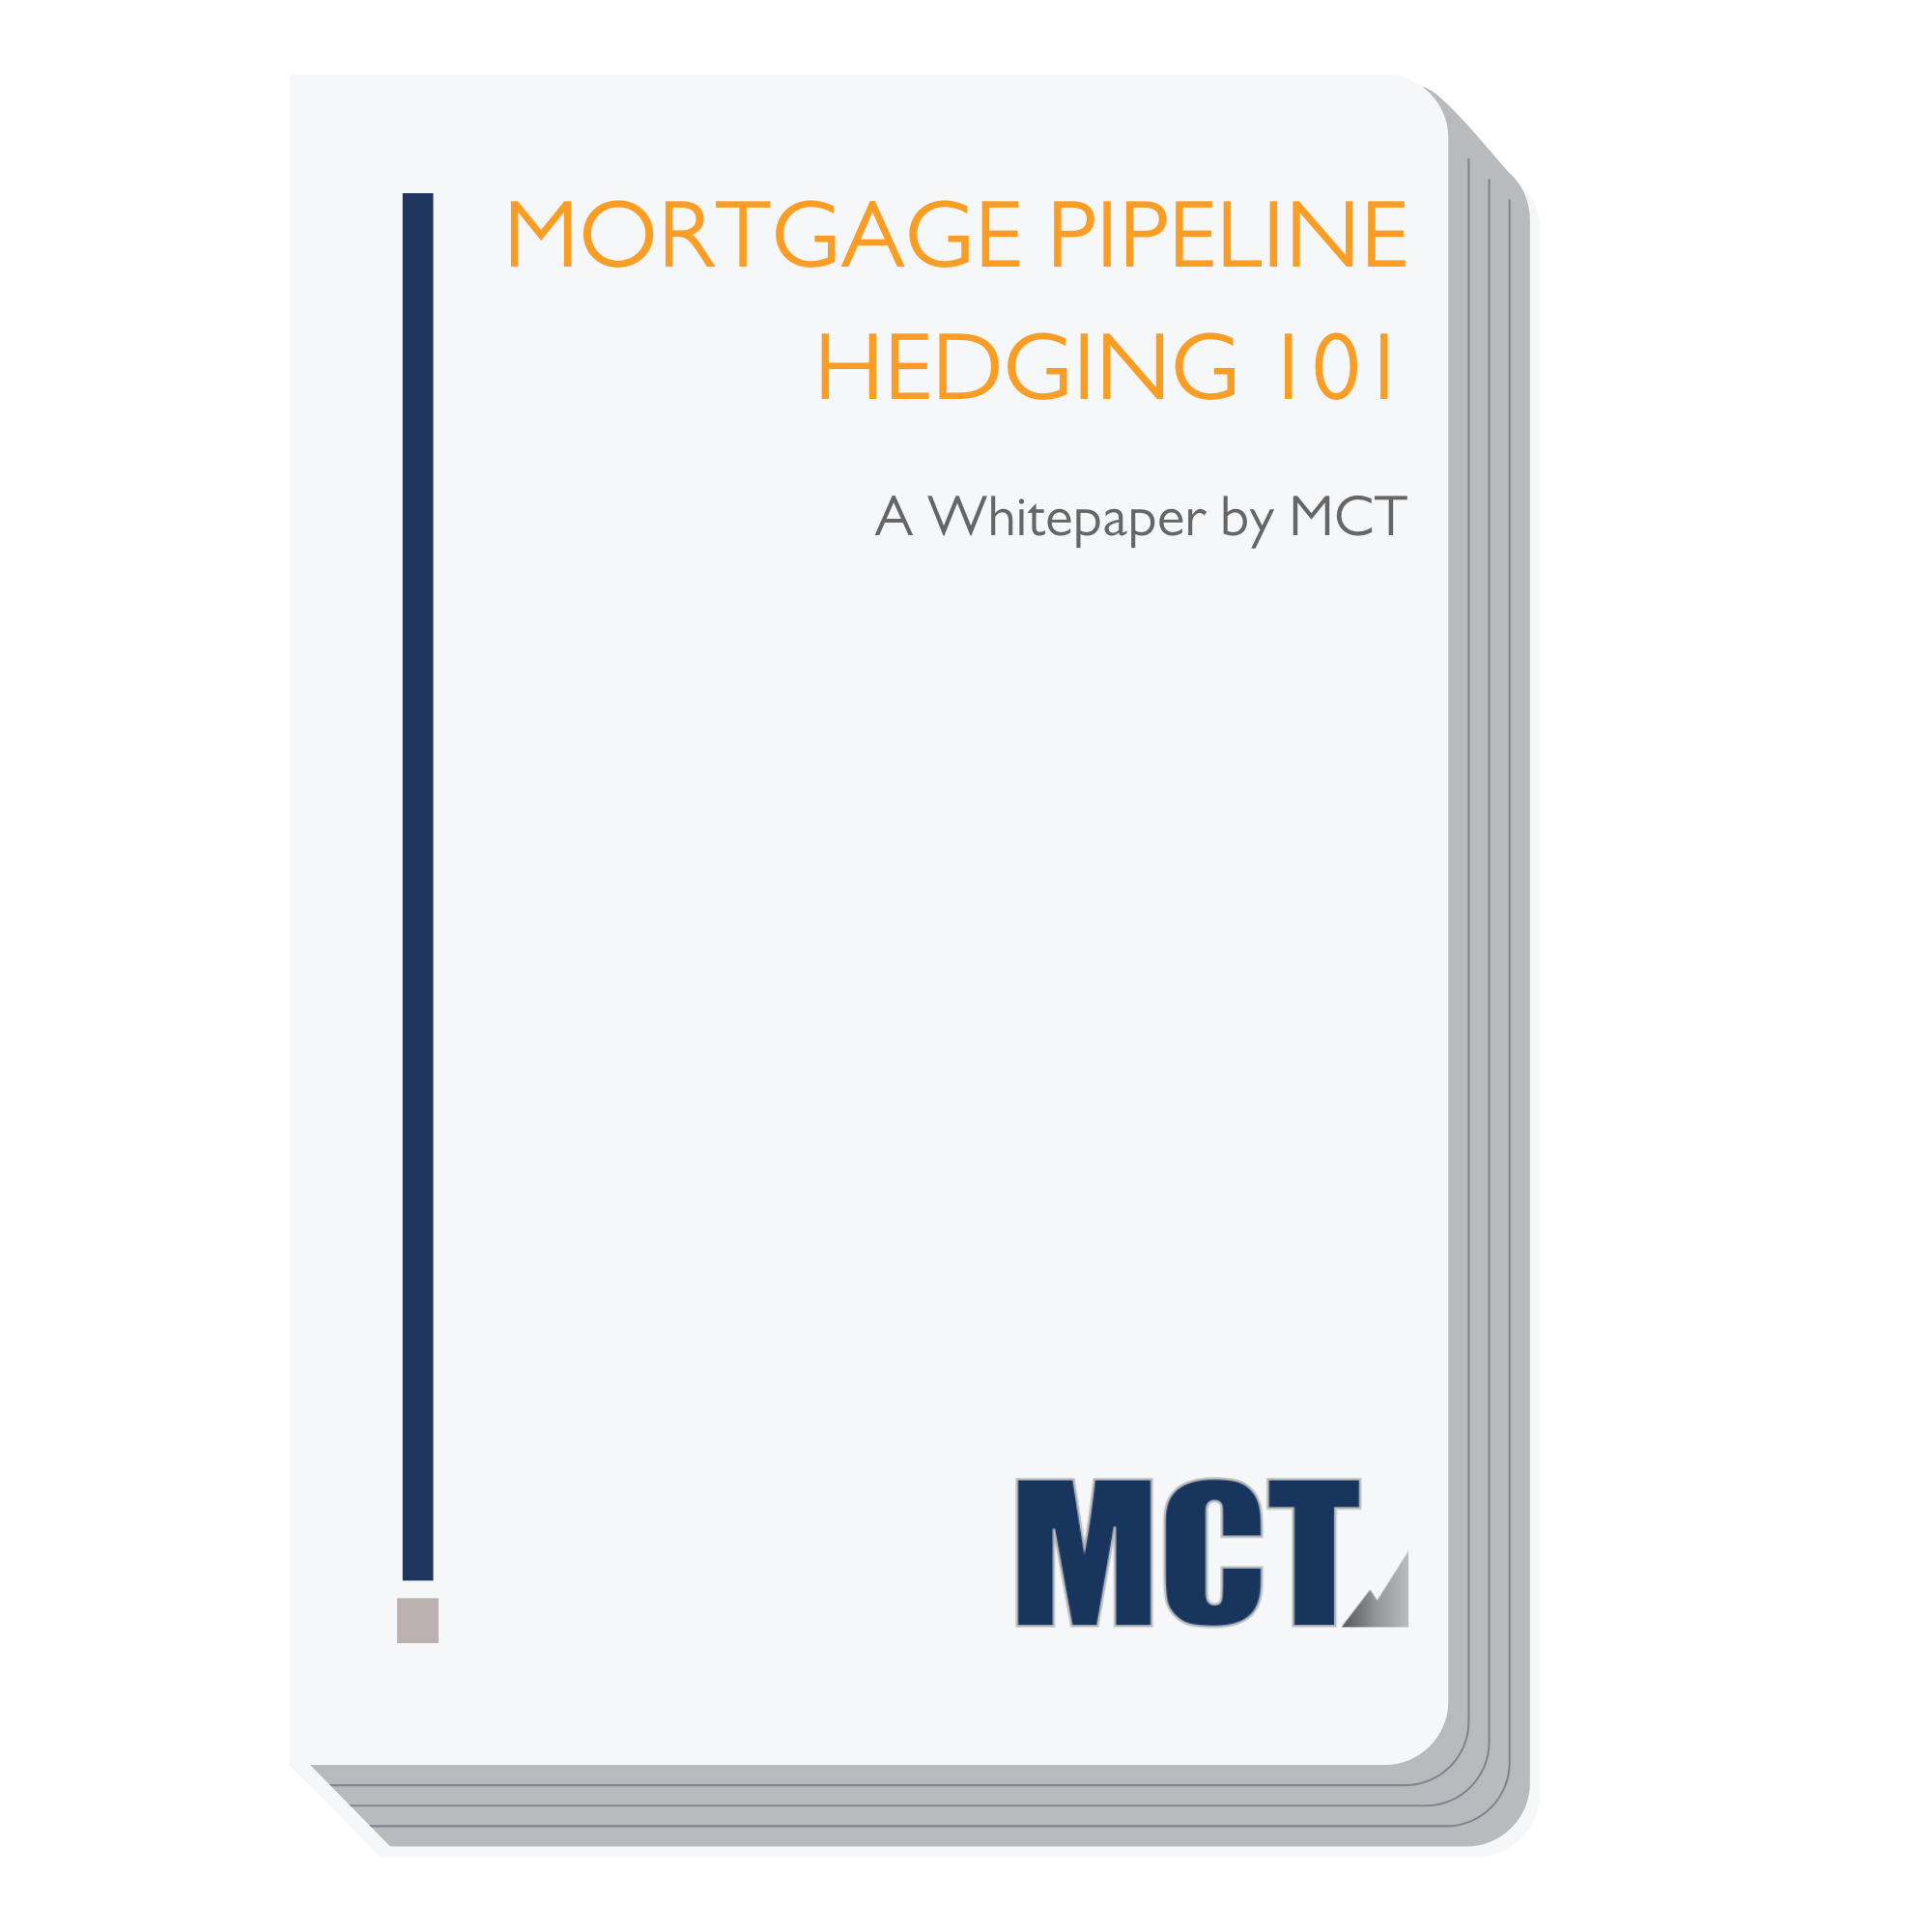 Whitepaper on Mortgage Pipeline Hedging